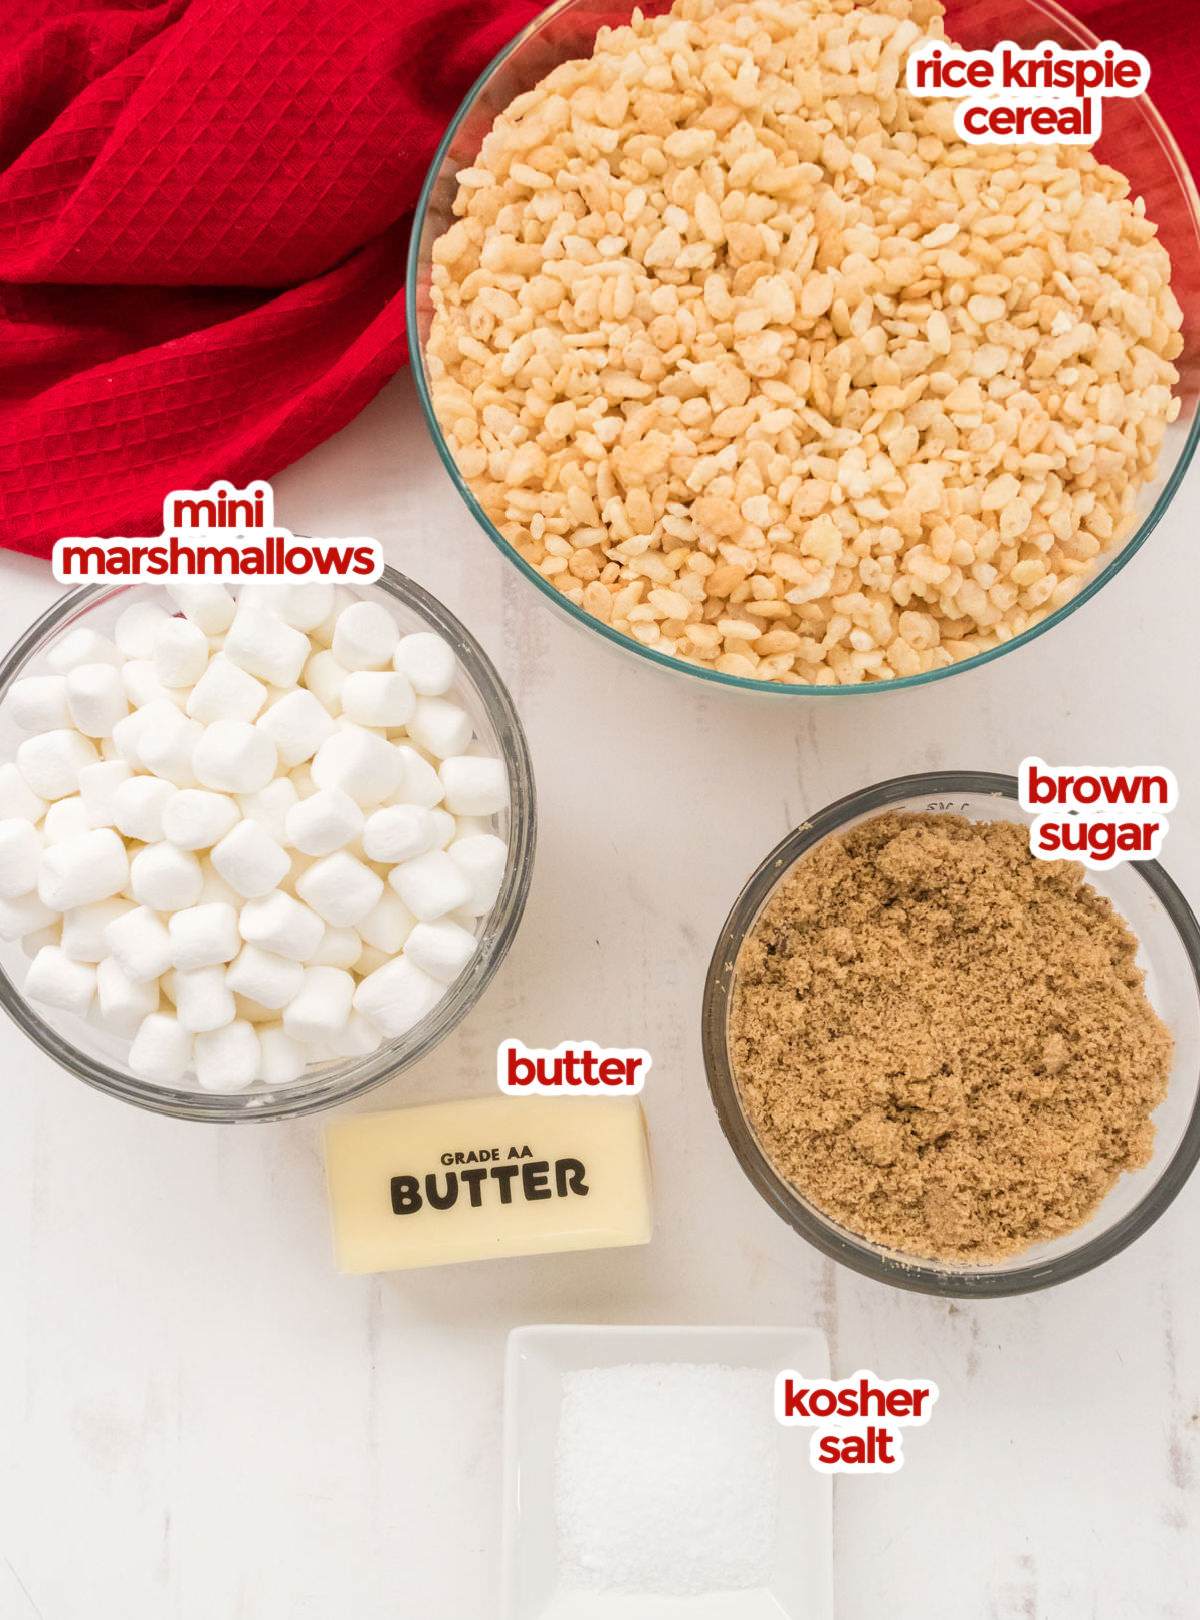 All the ingredients you will need to make the Salted Caramel Rice Krispie Treats including Rice Krispie Cereal, Mini Marshmallows, Brown Sugar, Butter and Kosher Salt.